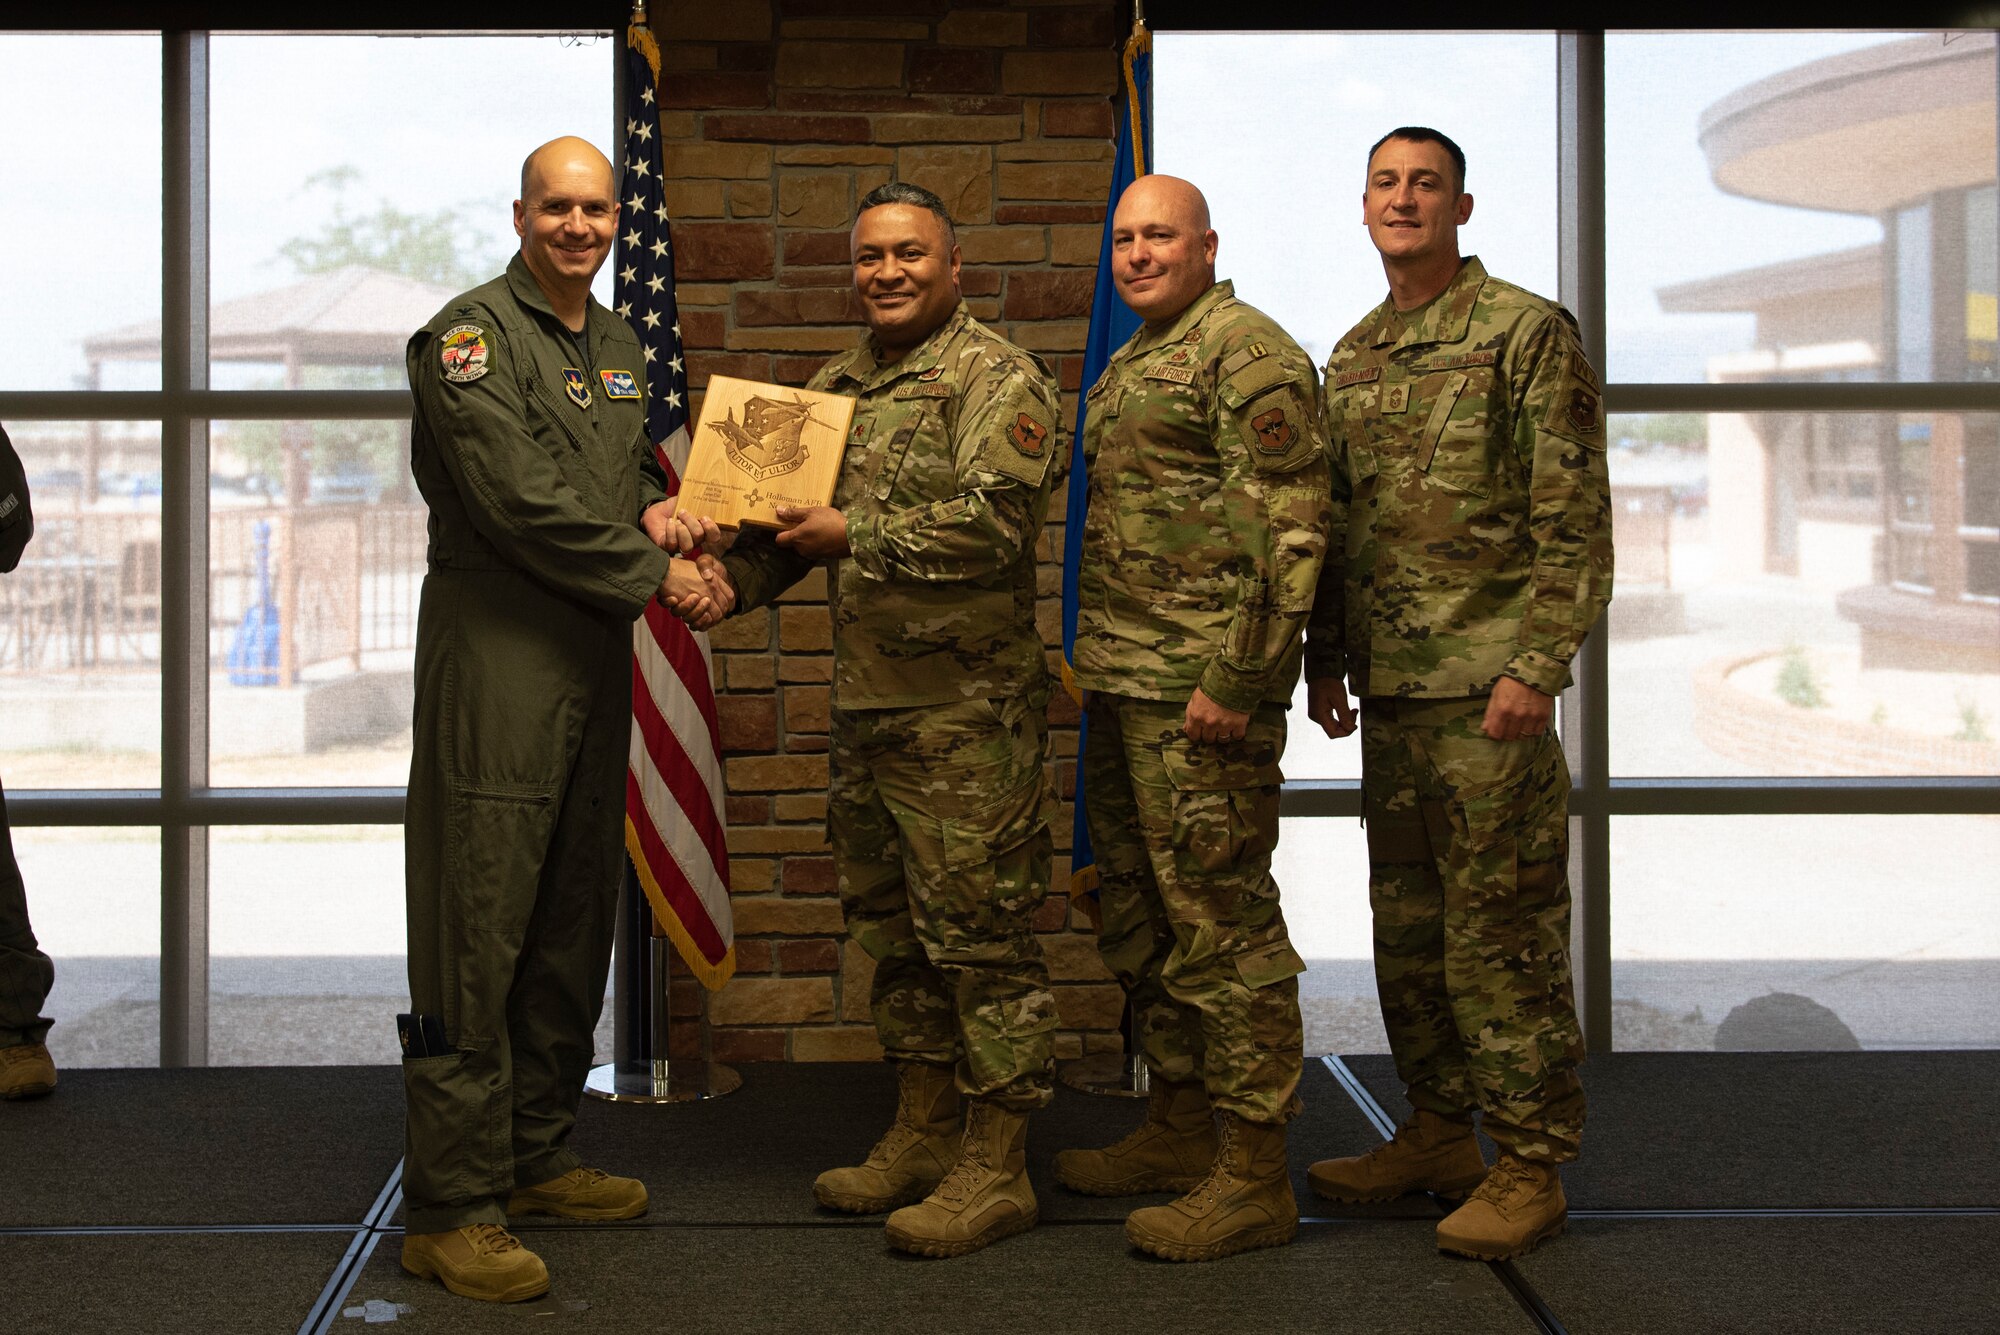 Representatives from 49th Equipment Maintenance Squadron accept the Large Unit of the Quarter Award during the 49th Wing’s 1st quarter awards ceremony, June 10, 2022, on Holloman Air Force Base, New Mexico.